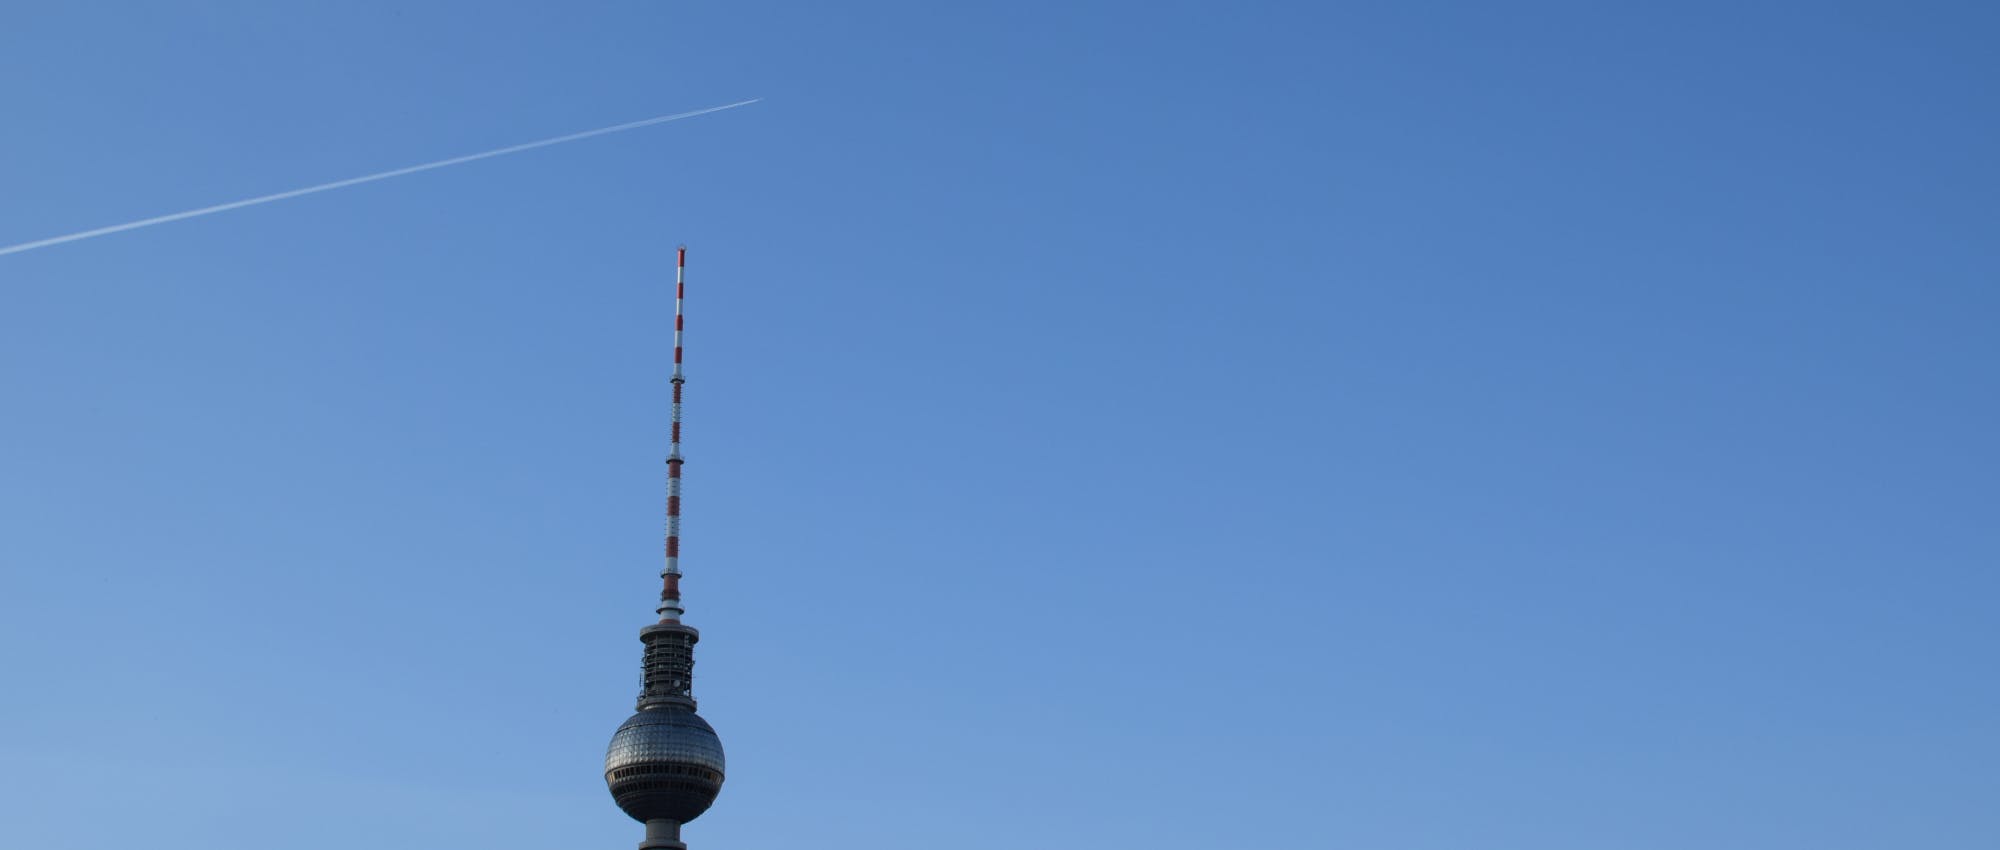 A photo of the Berlin TV tower with contrails in the sky. Shot on a Nikon D3300 with a 35mm f/1.8 lens by Xe Iaso.